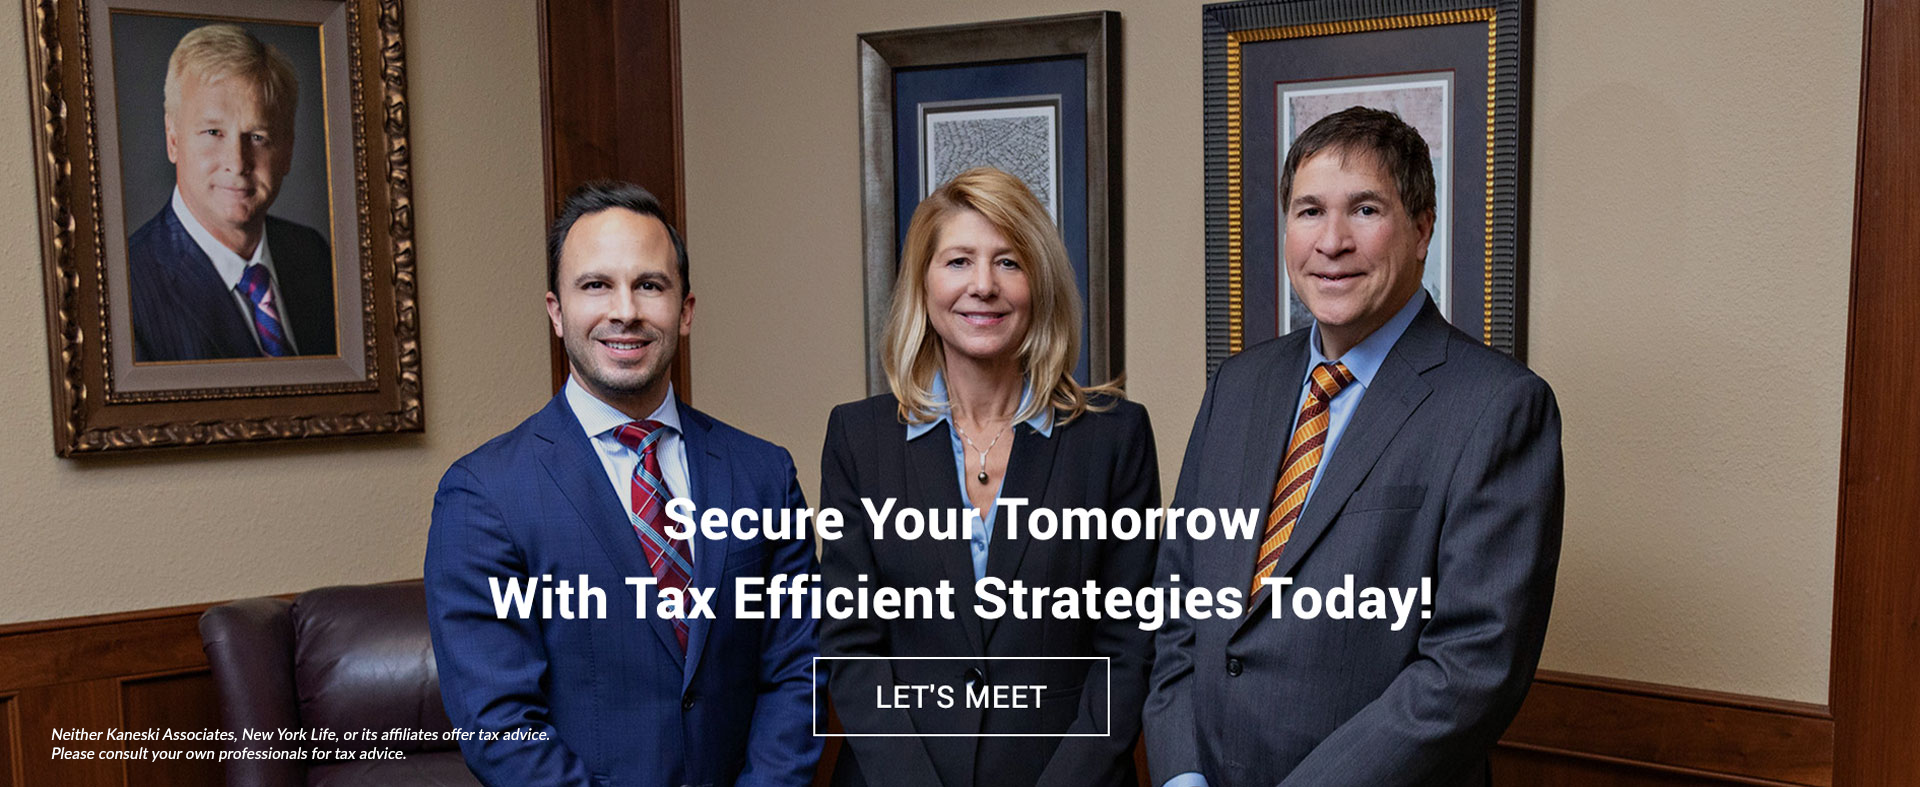 Secure Your Tomorrow
With Tax Efficient Strategies Today!